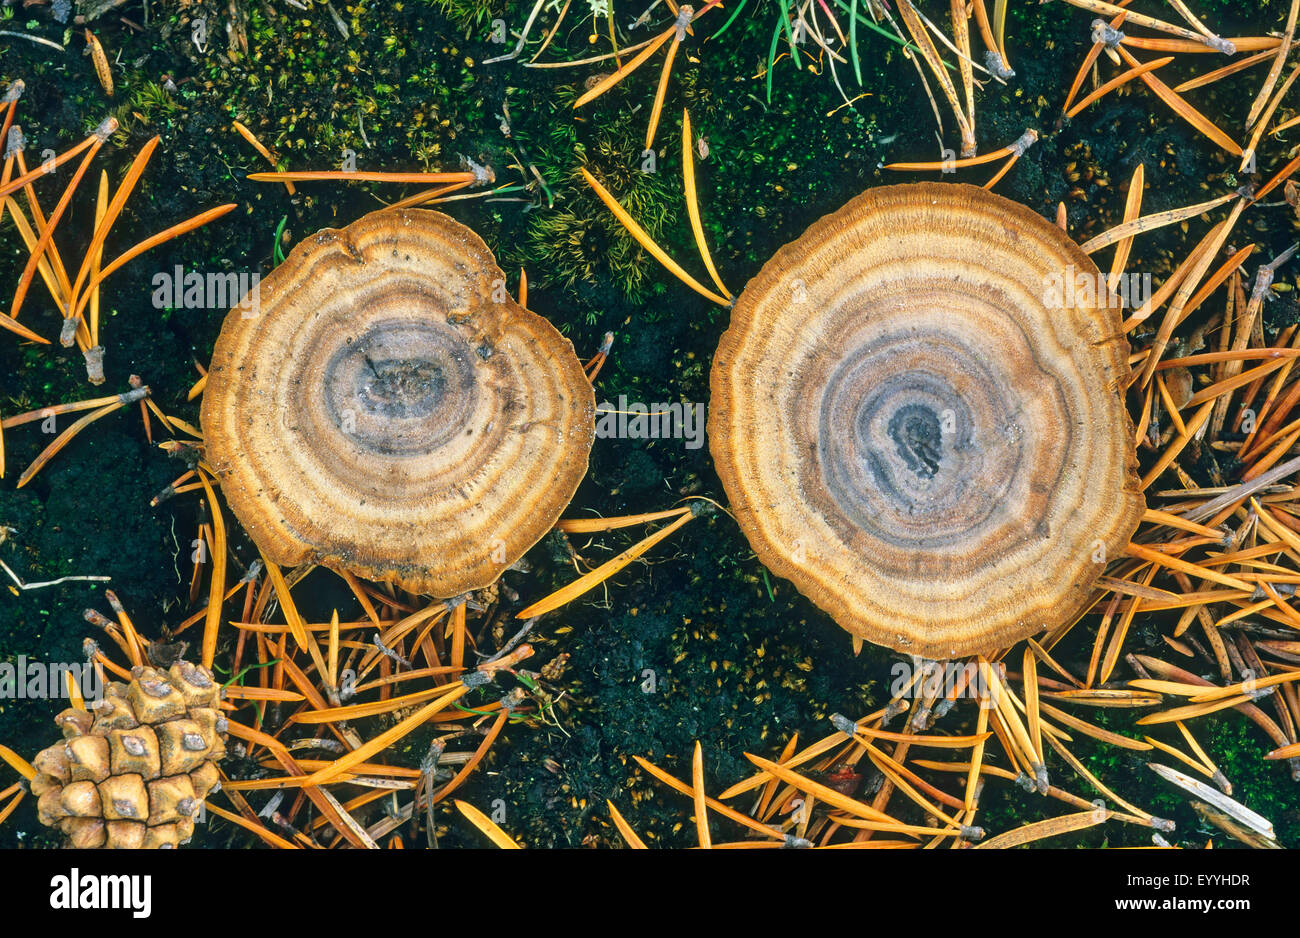 tiger's eye (Coltricia perennis), two fruiting bodies on mossy forest ground, view from above, Germany Stock Photo